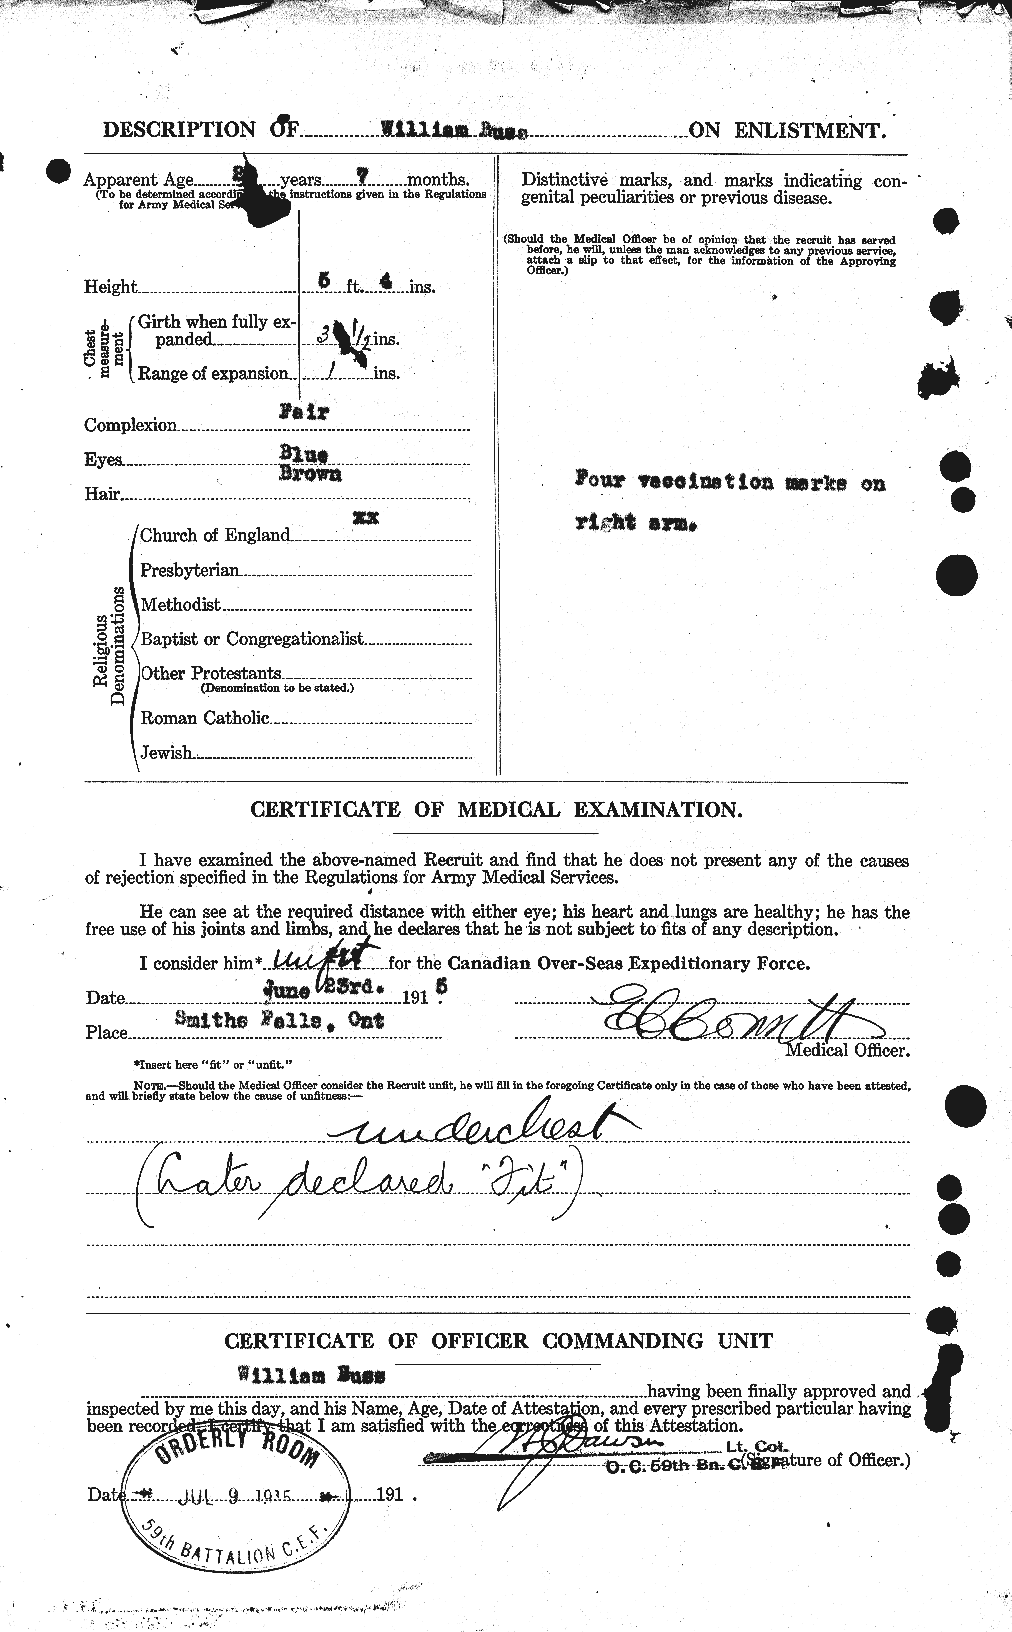 Personnel Records of the First World War - CEF 274575b